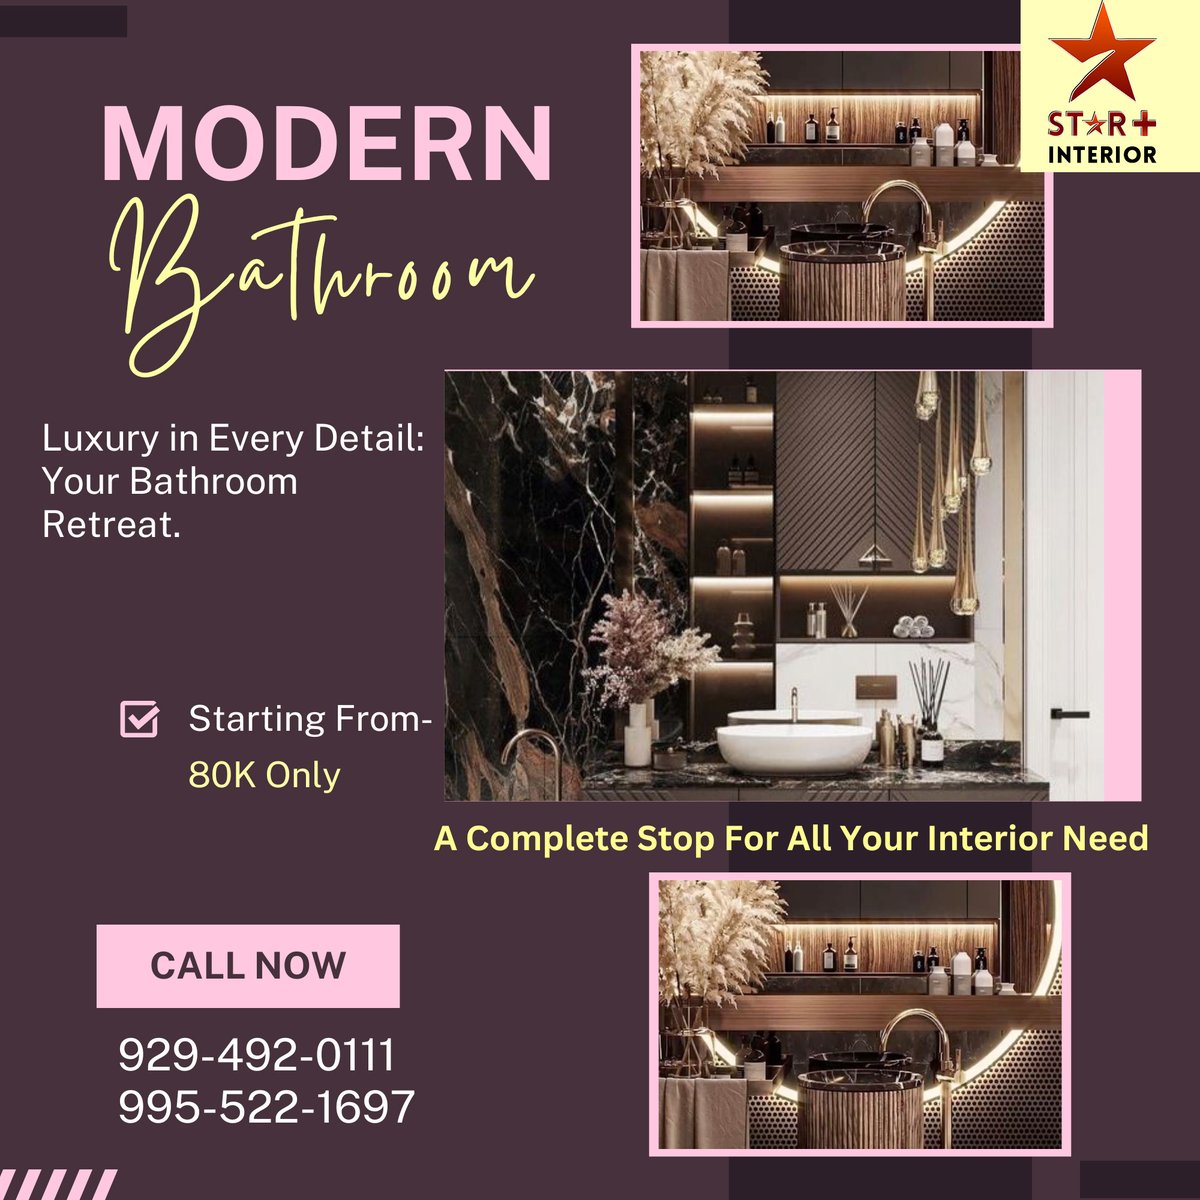 STAR PLUS INTERIOR

Elevate your bathroom with our premium fixtures and accessories. Let's turn your bath time into a spa-like retreat! 
Book your appointment with us 
 #interiordesigner #architecturedesign #homedecorideas #homestylingideas #latestdesigns